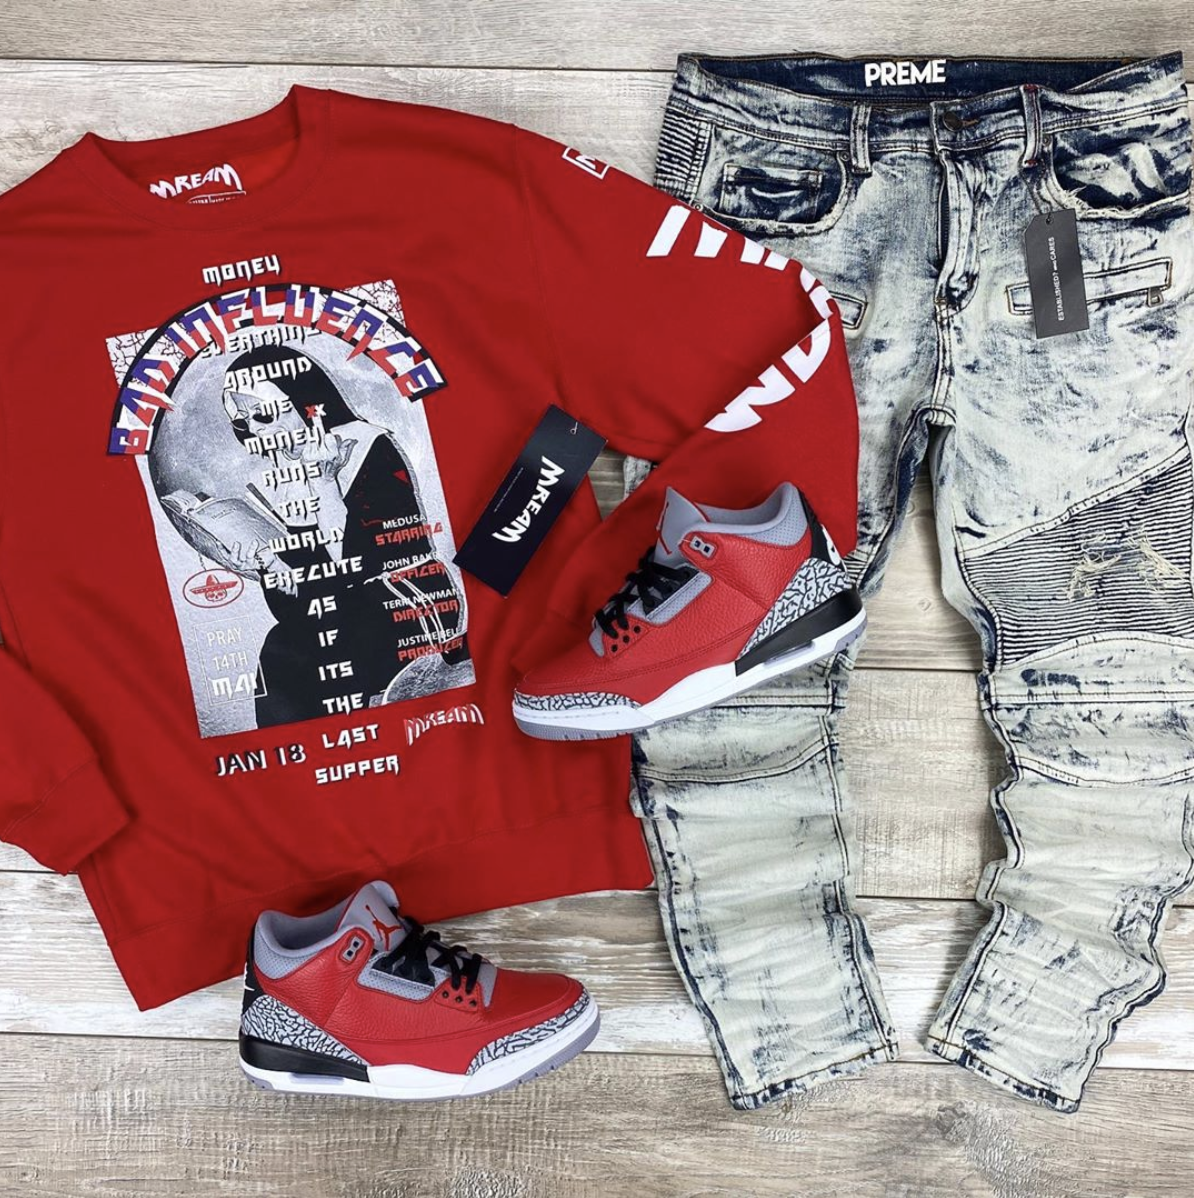 air jordan 3 red cement outfit